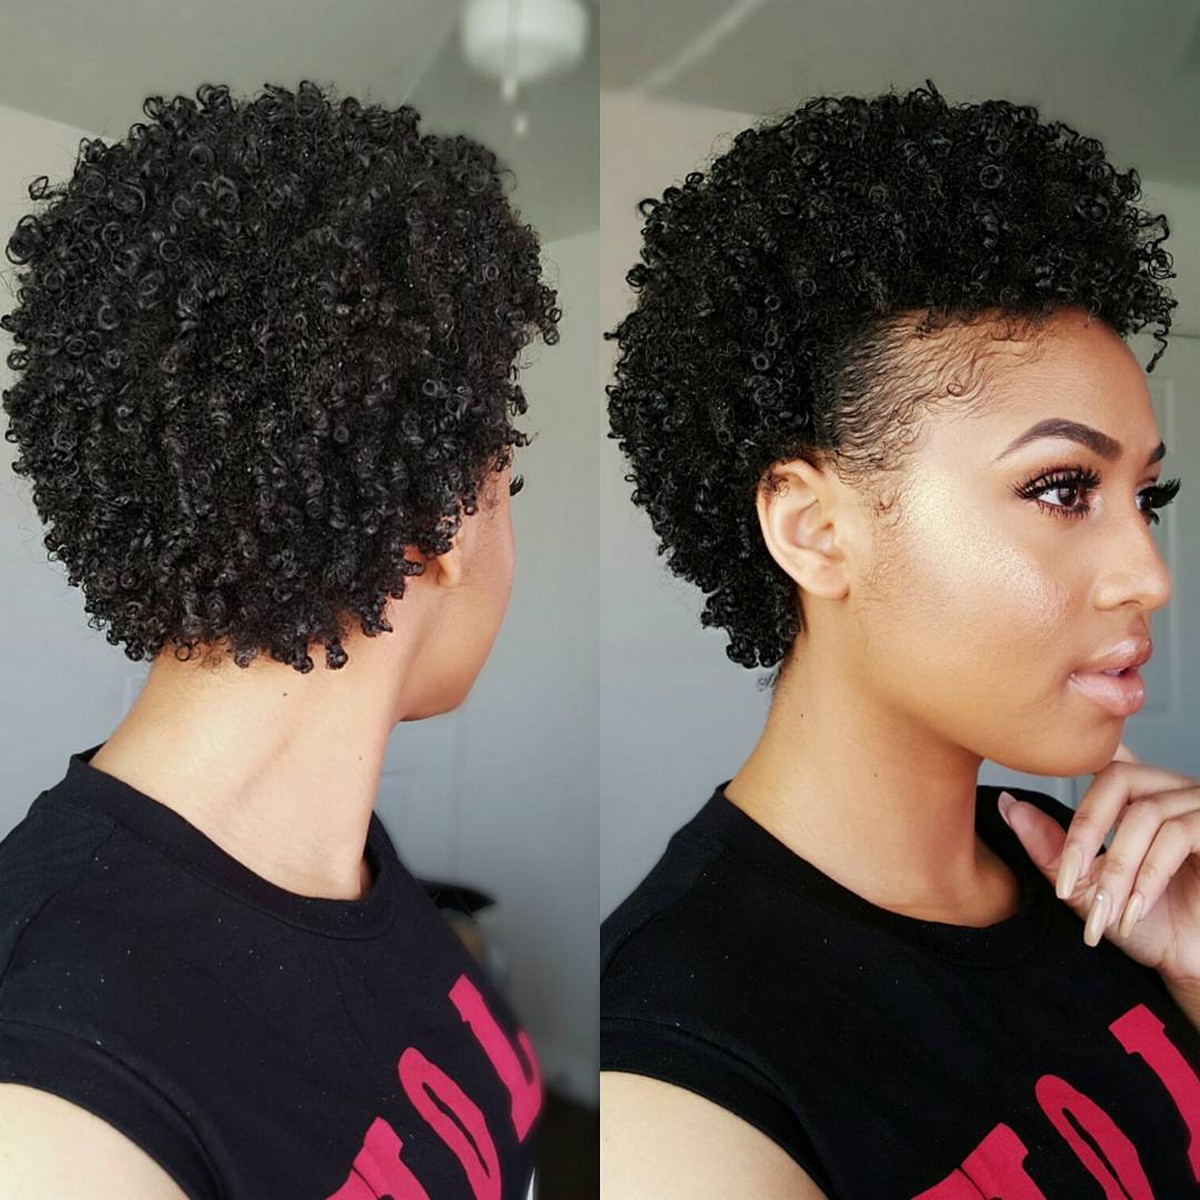 Short Natural With Low Fade Hair